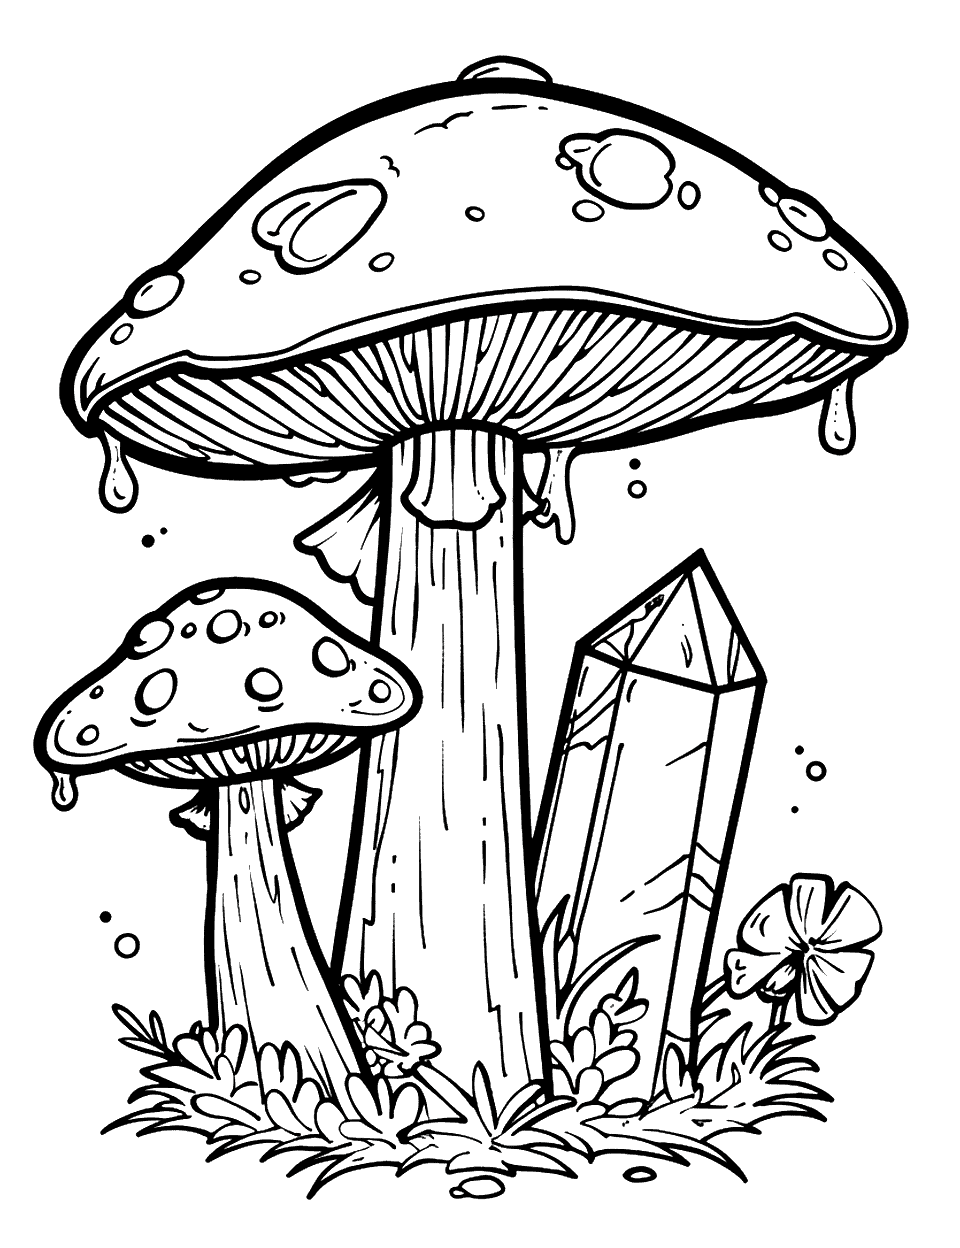 Magical Mushrooms and Crystals Mushroom Coloring Page - Mushroom growing next to a large, shimmering crystals in the forest.